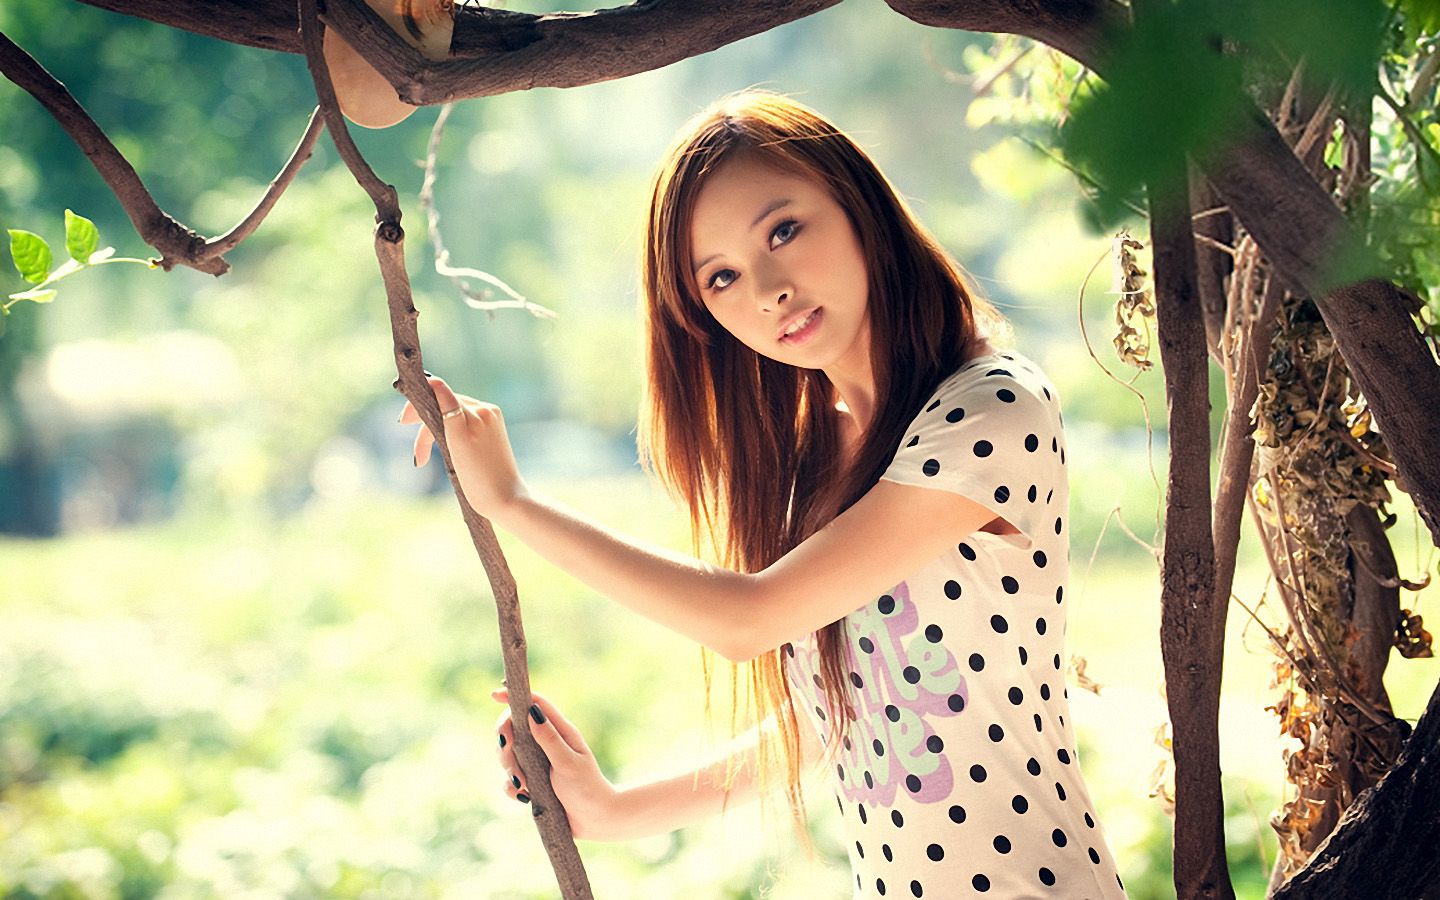 smile girl hd wallpaper,people in nature,nature,beauty,skin,tree